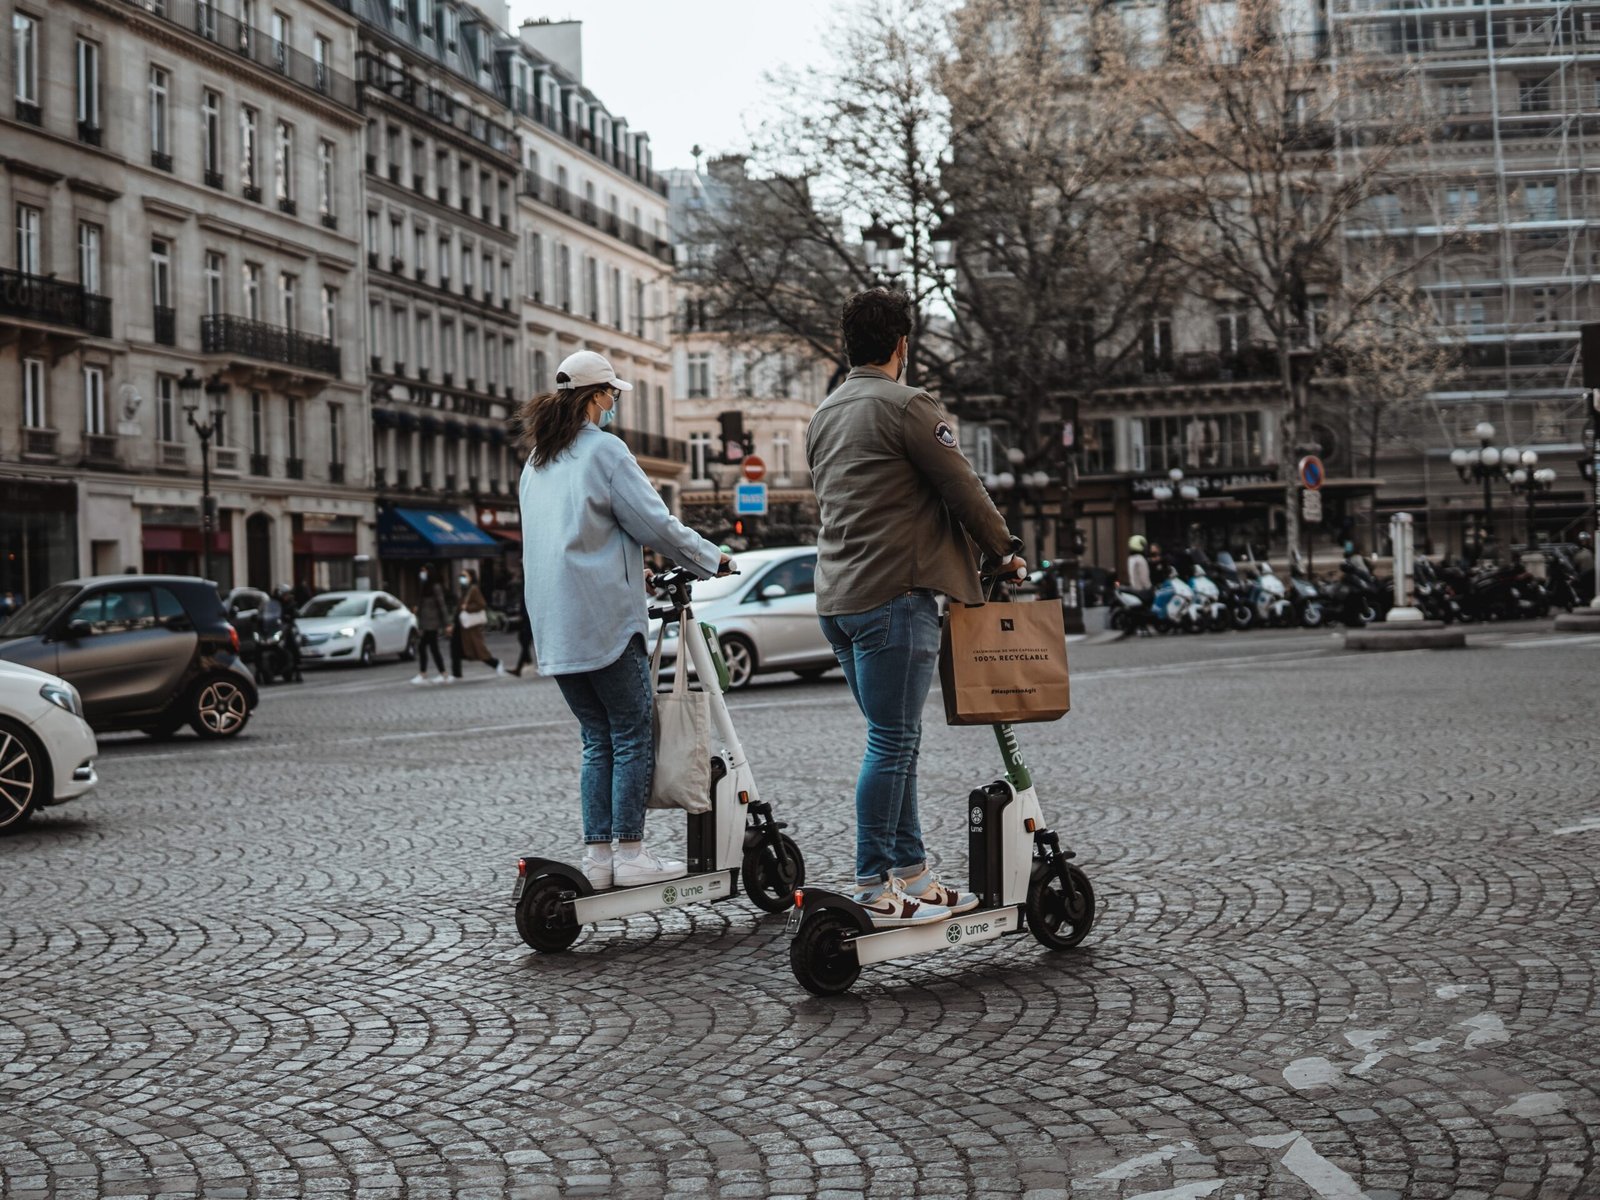 Can I Ride My Electric Scooter On Scooter Lanes Designated For Non-electric Scooters?